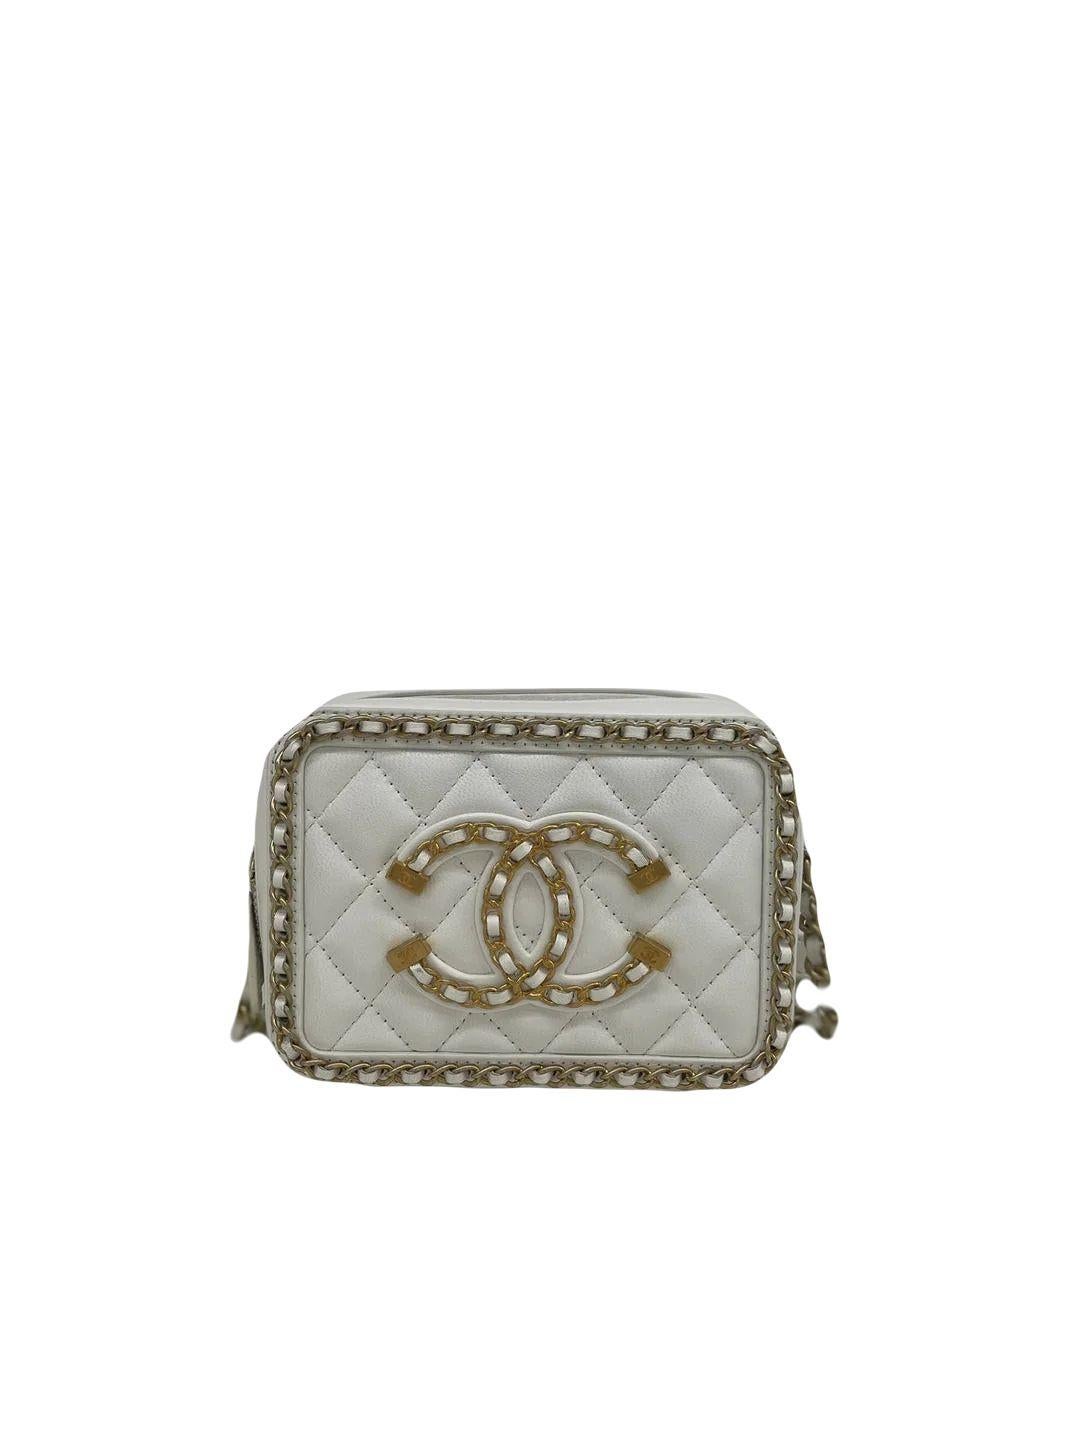 Chanel White Vanity Small - Chain Detail For Sale 1